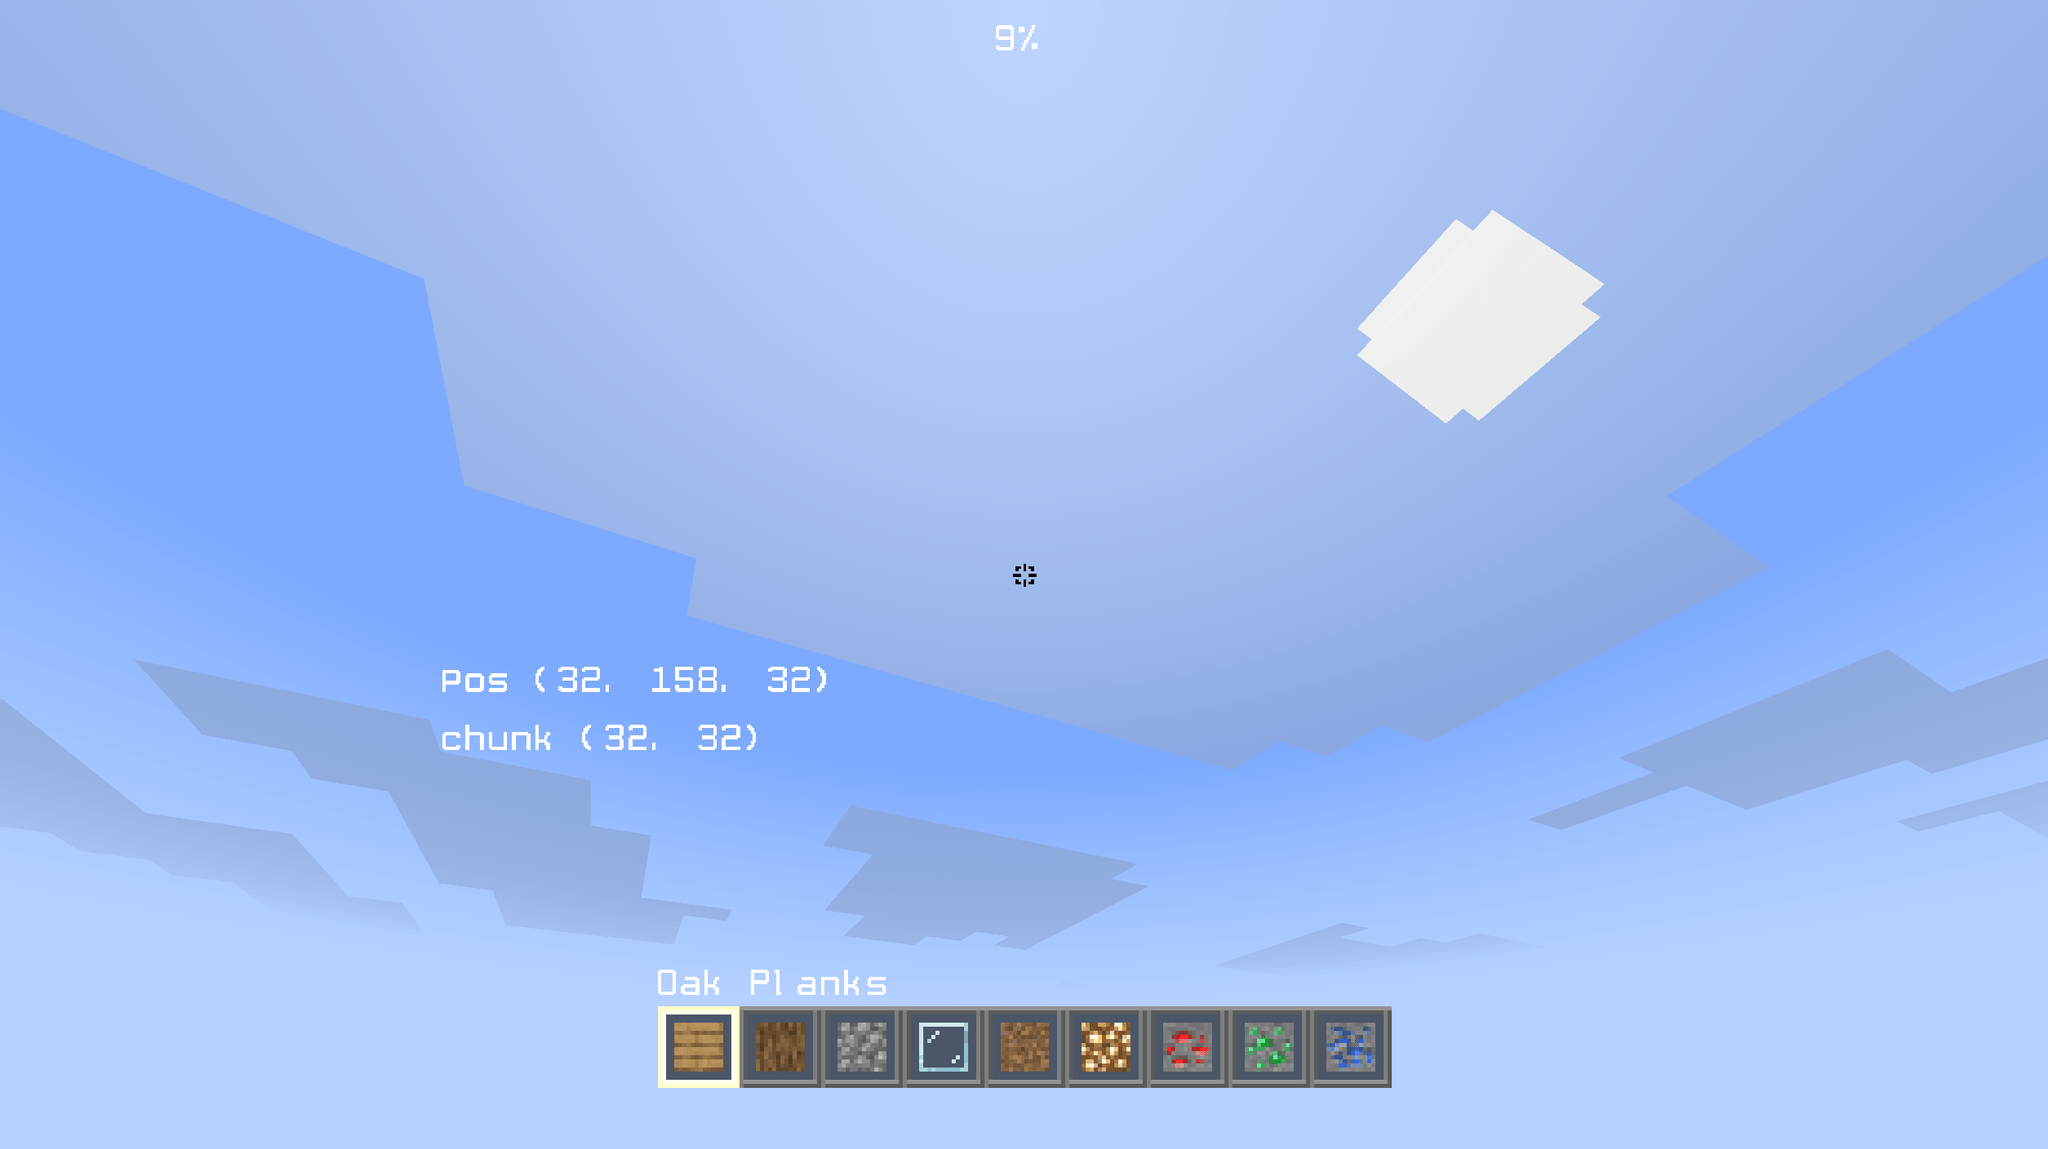 Debug mode is turned on, and shows the current player position as (32, 158, 32) and chunk coordinate as (32, 32).